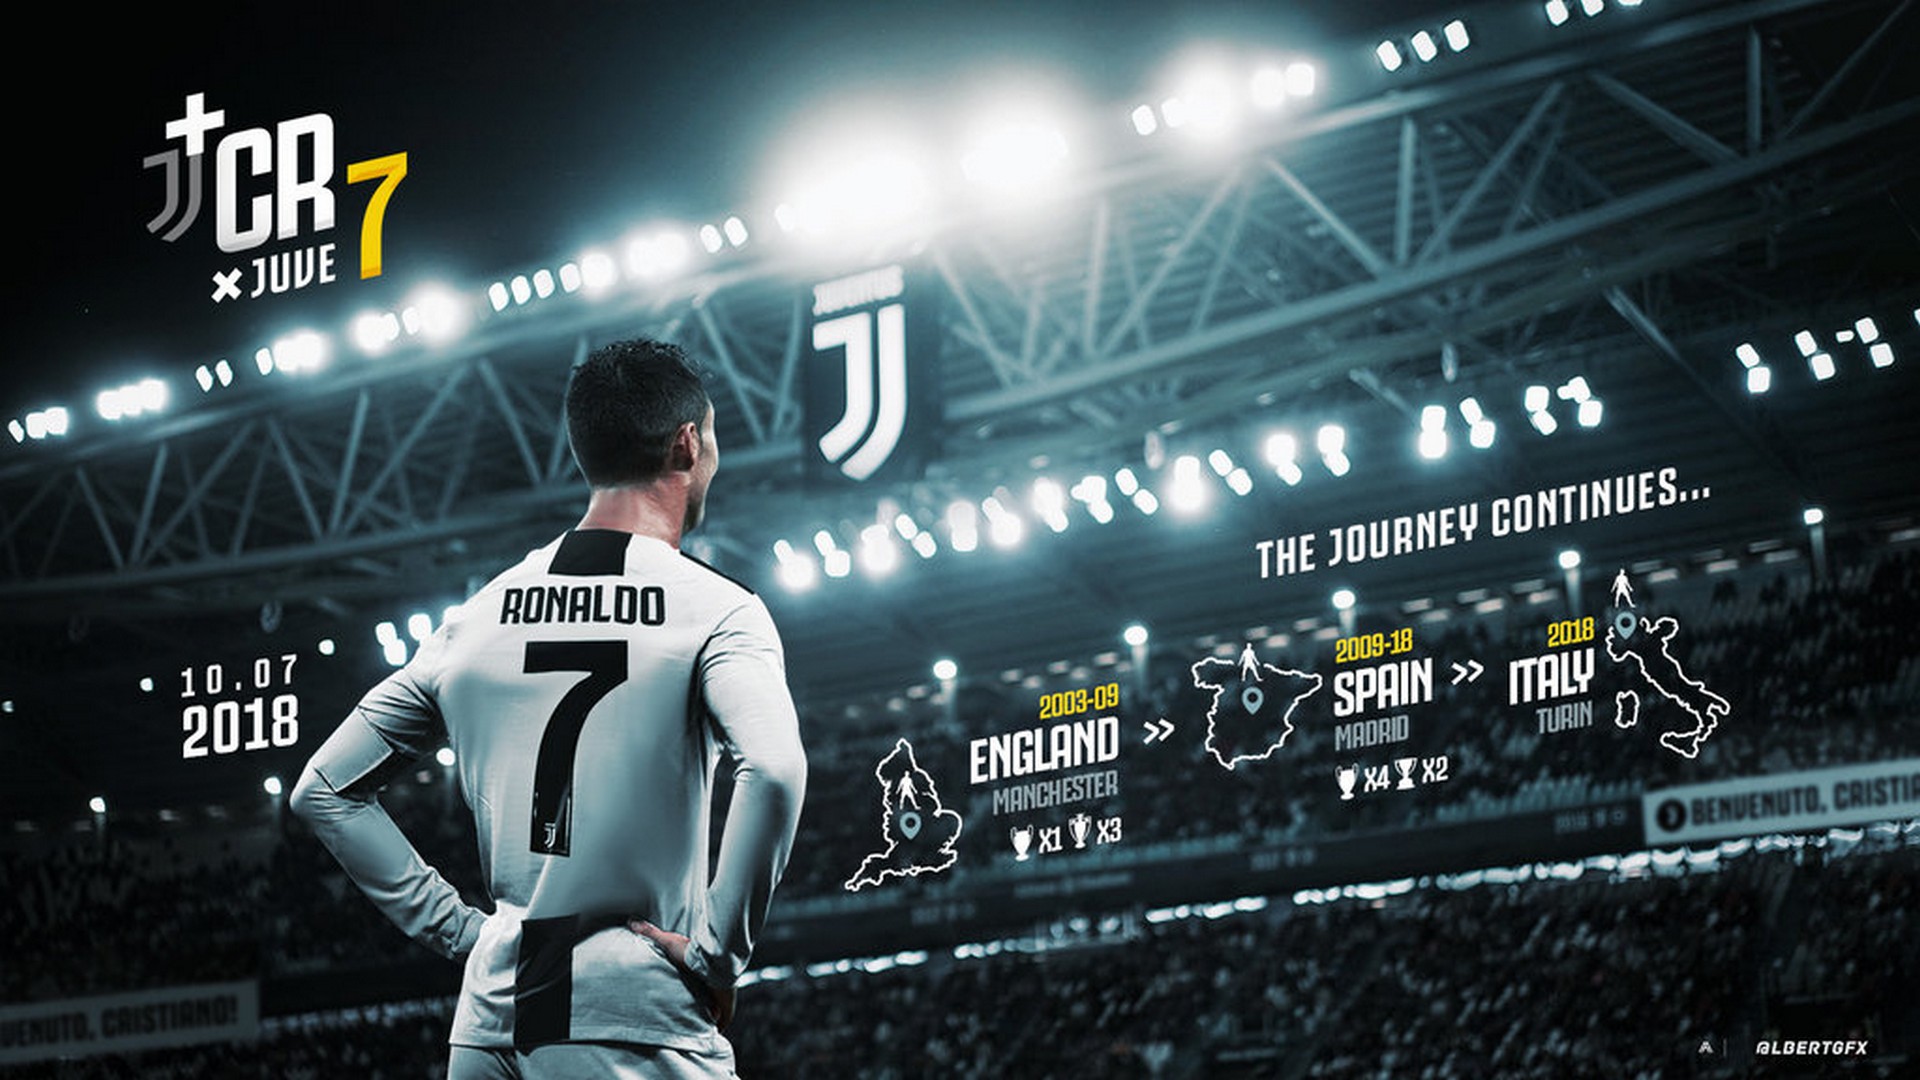 Best C Ronaldo Juventus Wallpaper with resolution 1920X1080 pixel. You can use this wallpaper as background for your desktop Computer Screensavers, Android or iPhone smartphones